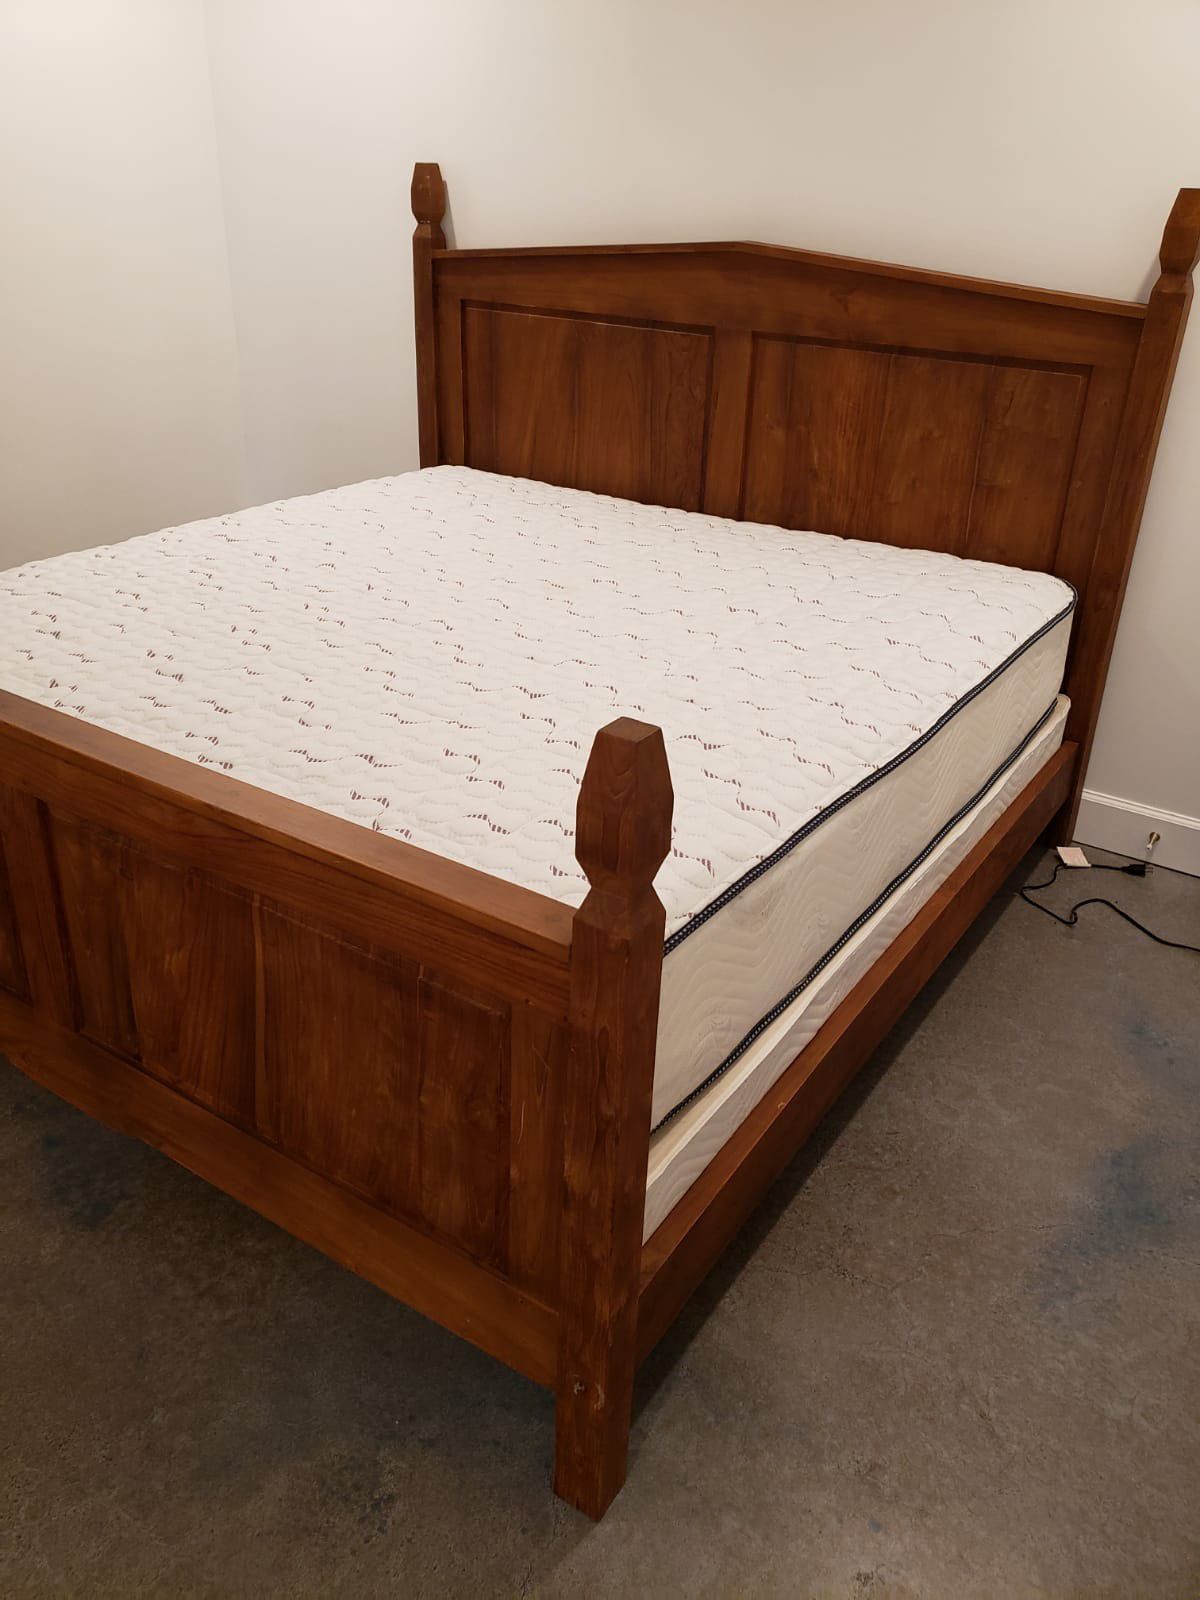 NEW QUEEN MATTRESS AND BOX SPRING SET, bed frame not included on price